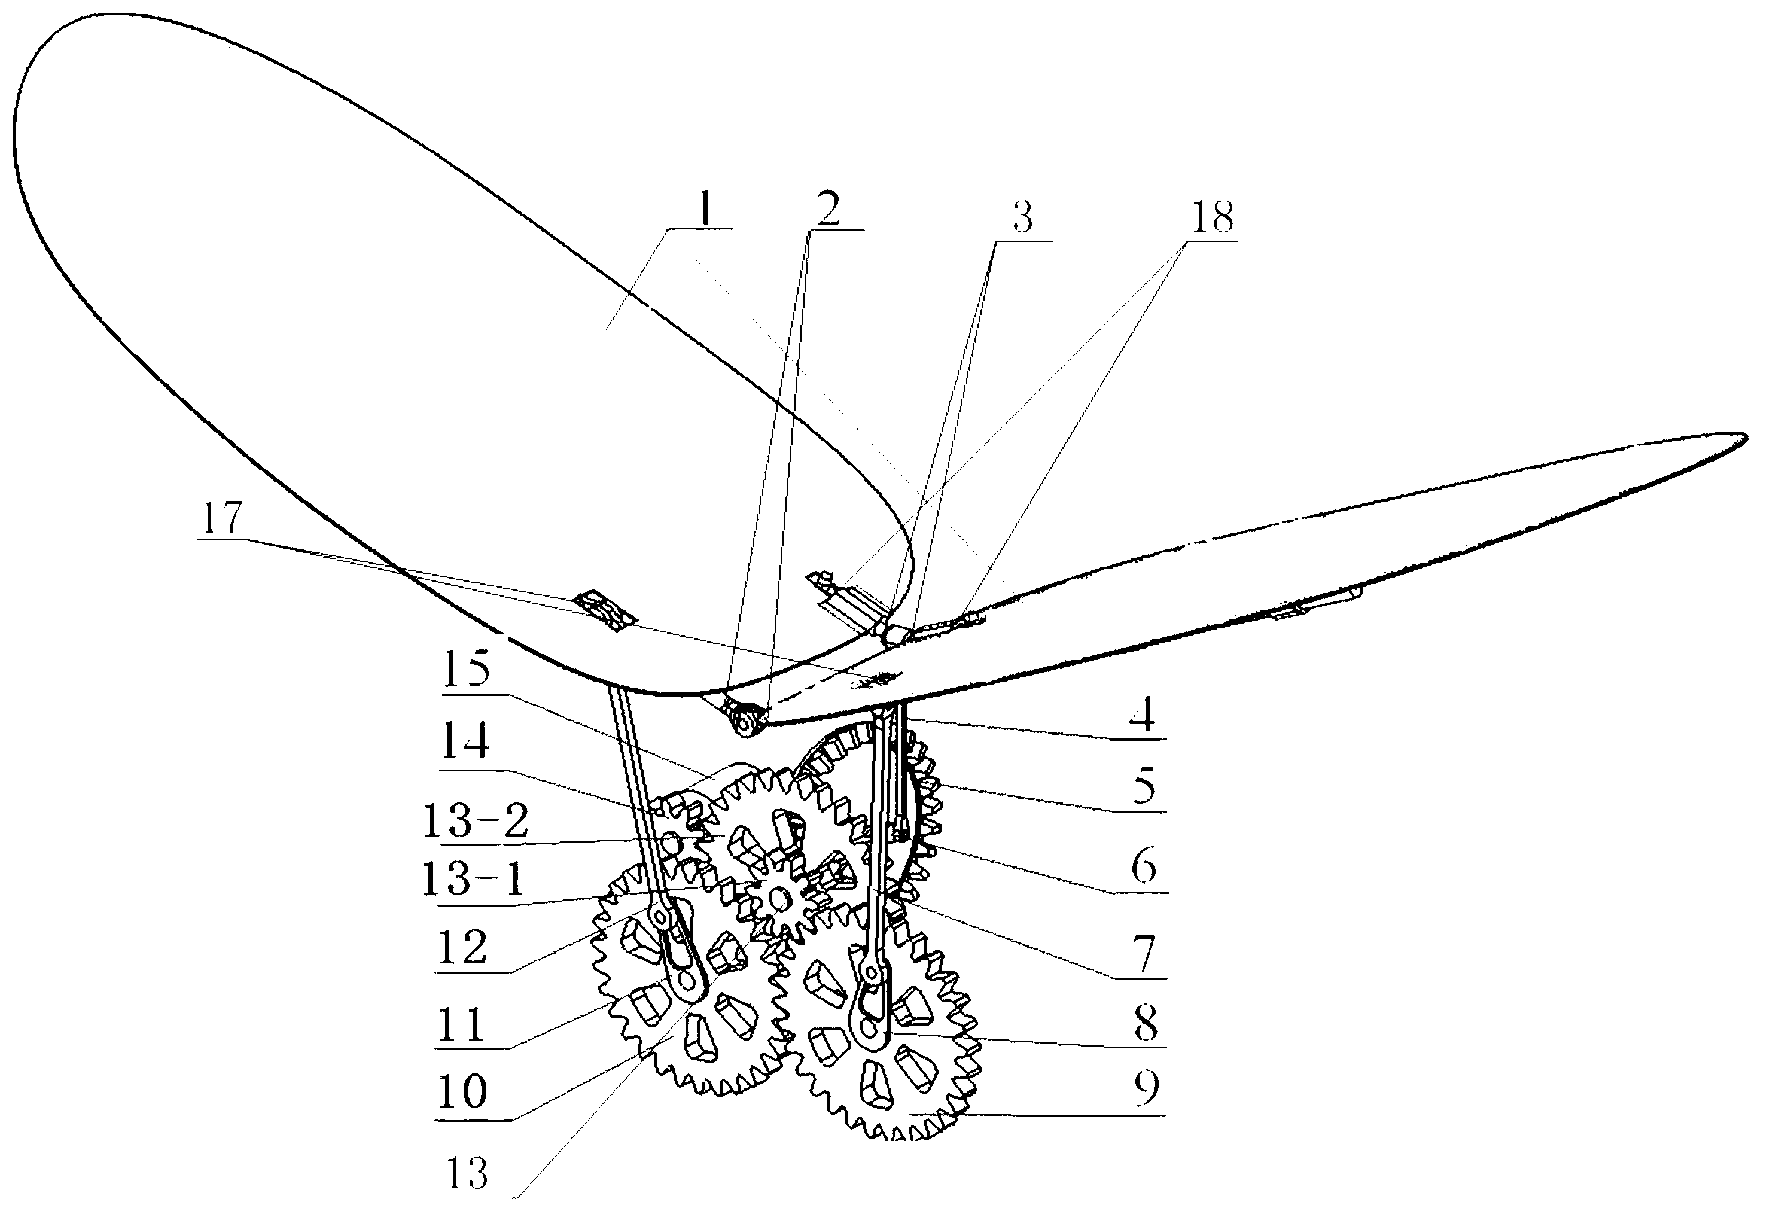 Flapping wing device for achieving active torsion for flapping wings and wing planes of aerofoil